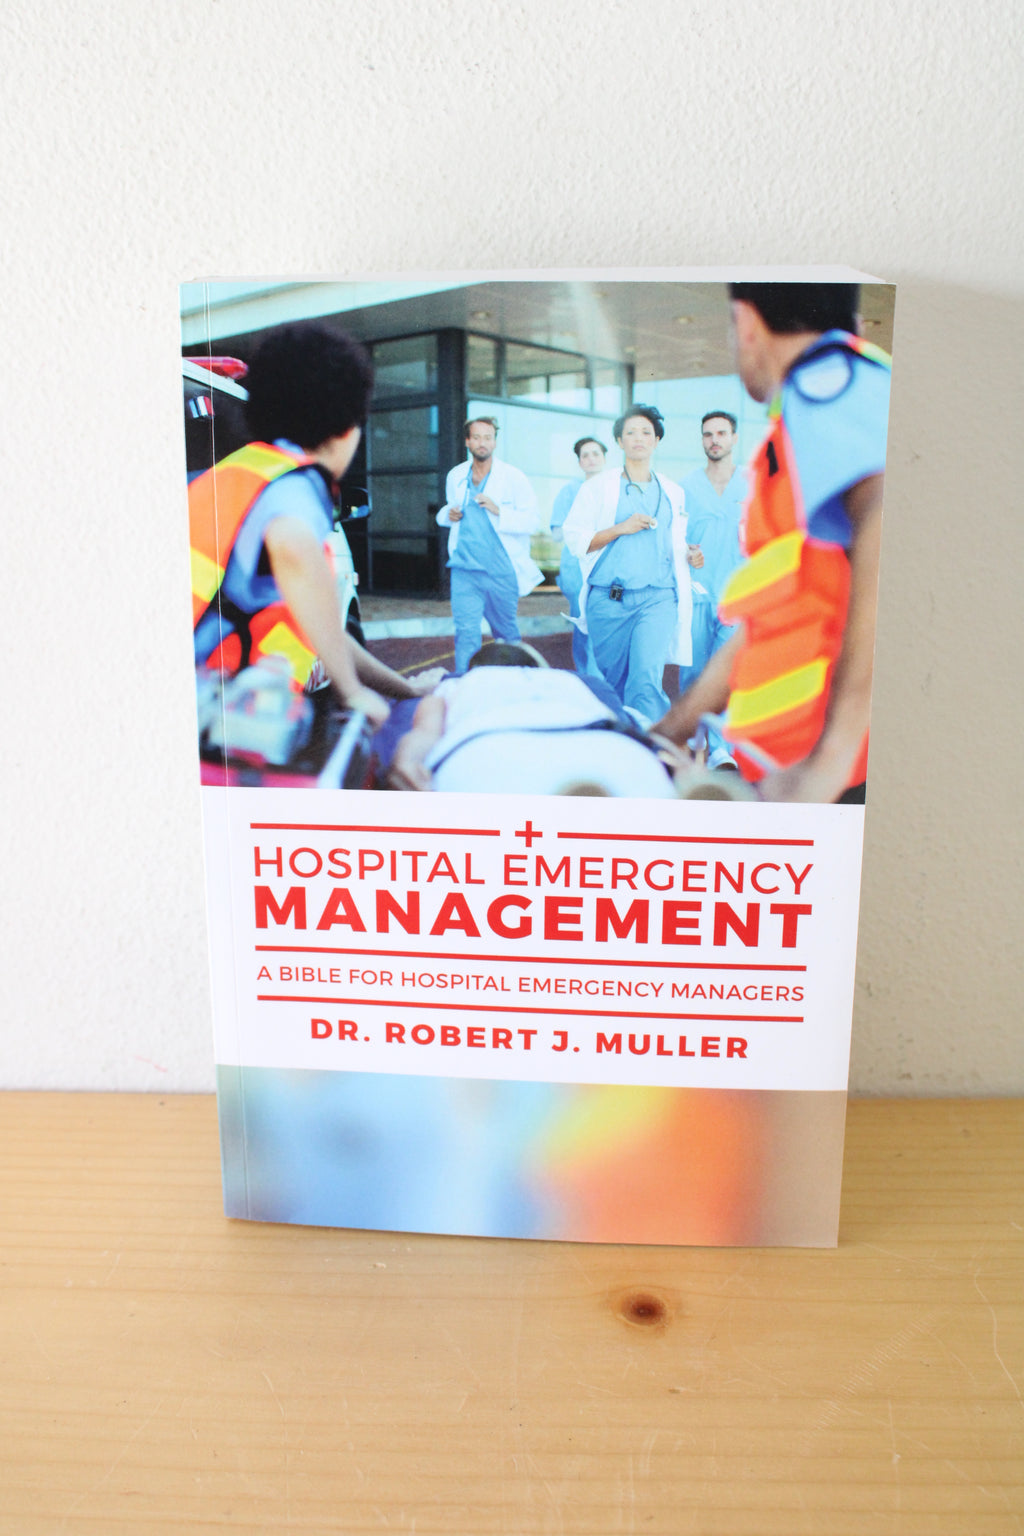 Hospital Emergency Management: A Bible For Hospital Emergency Managers By Dr. Robert J. Muller